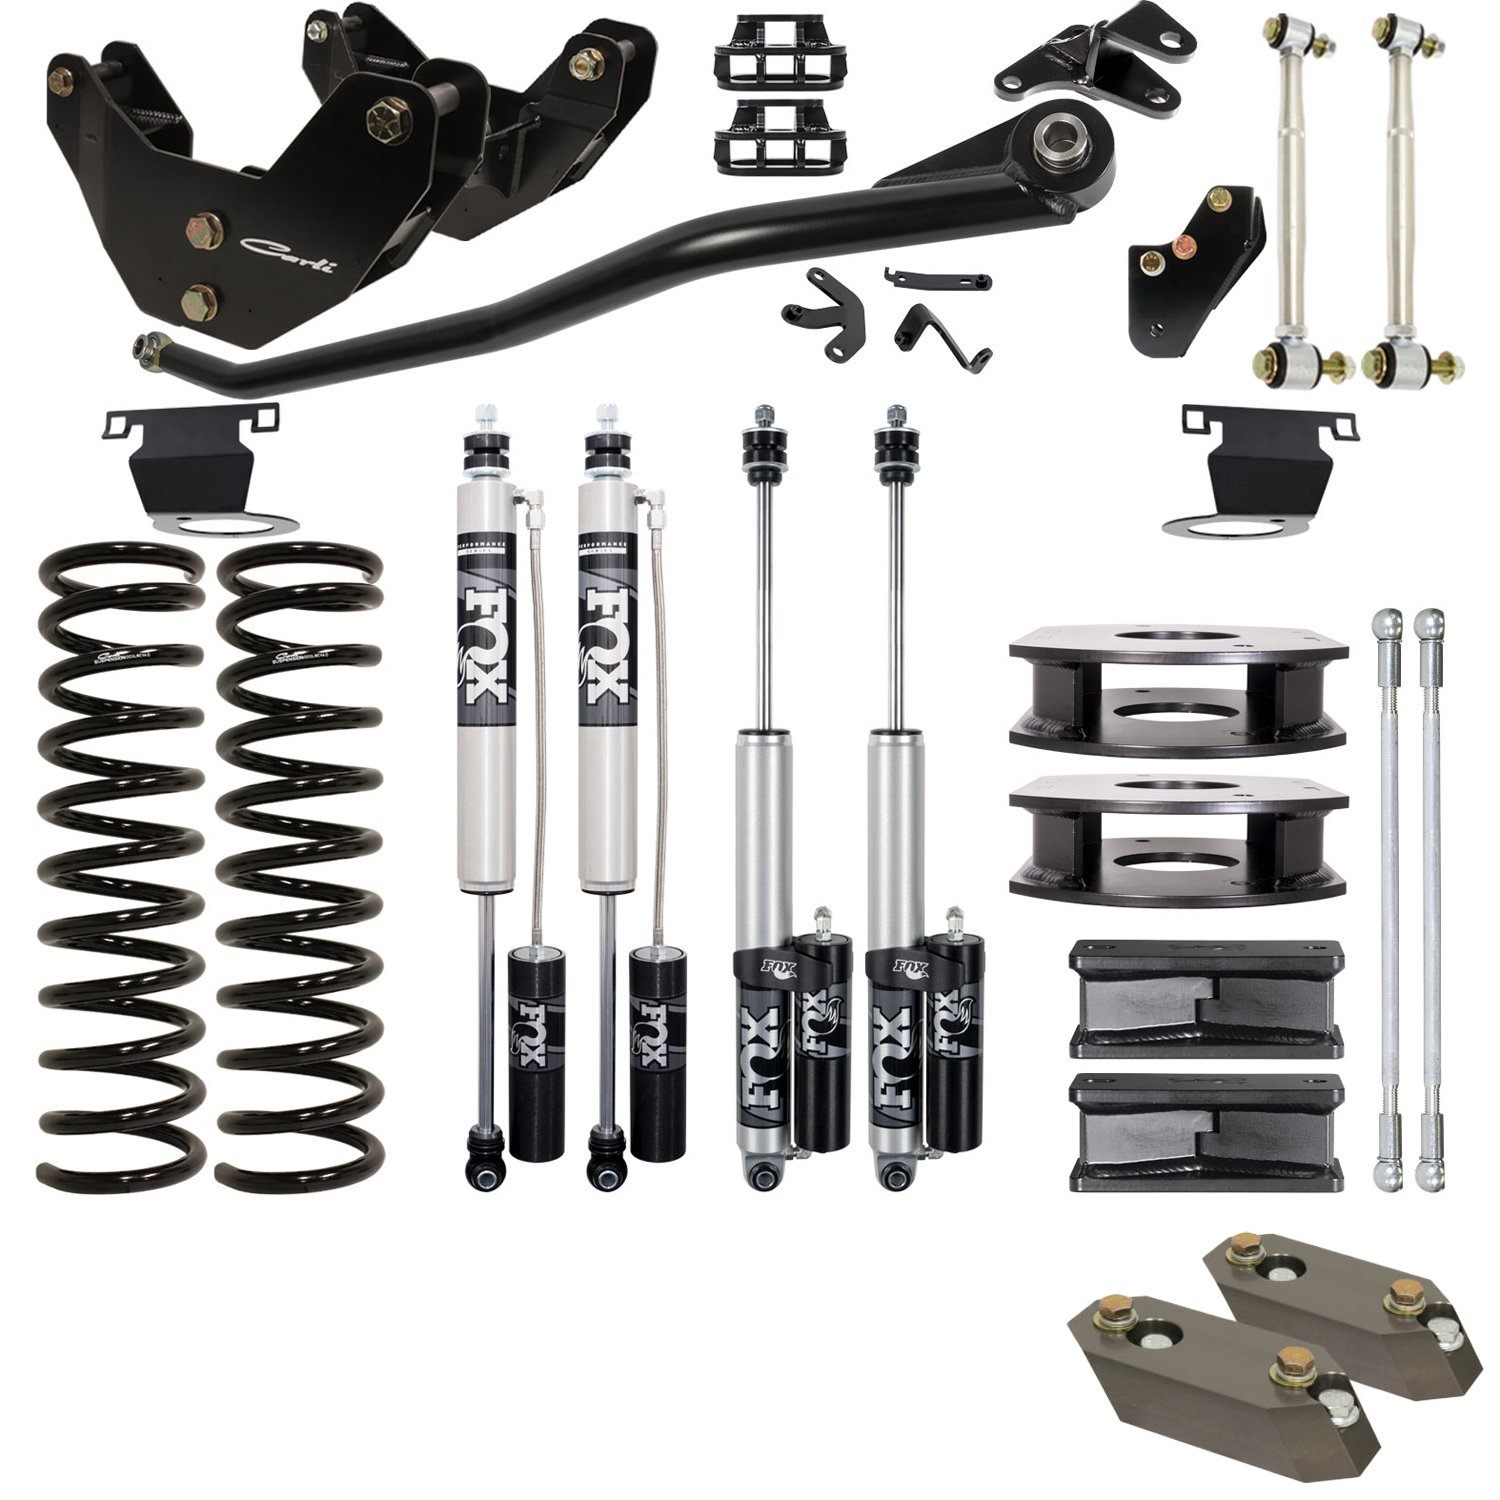 '19-23 Ram 2500 Air Ride Backcountry Suspension System-3.25" Lift Carli Suspension parts